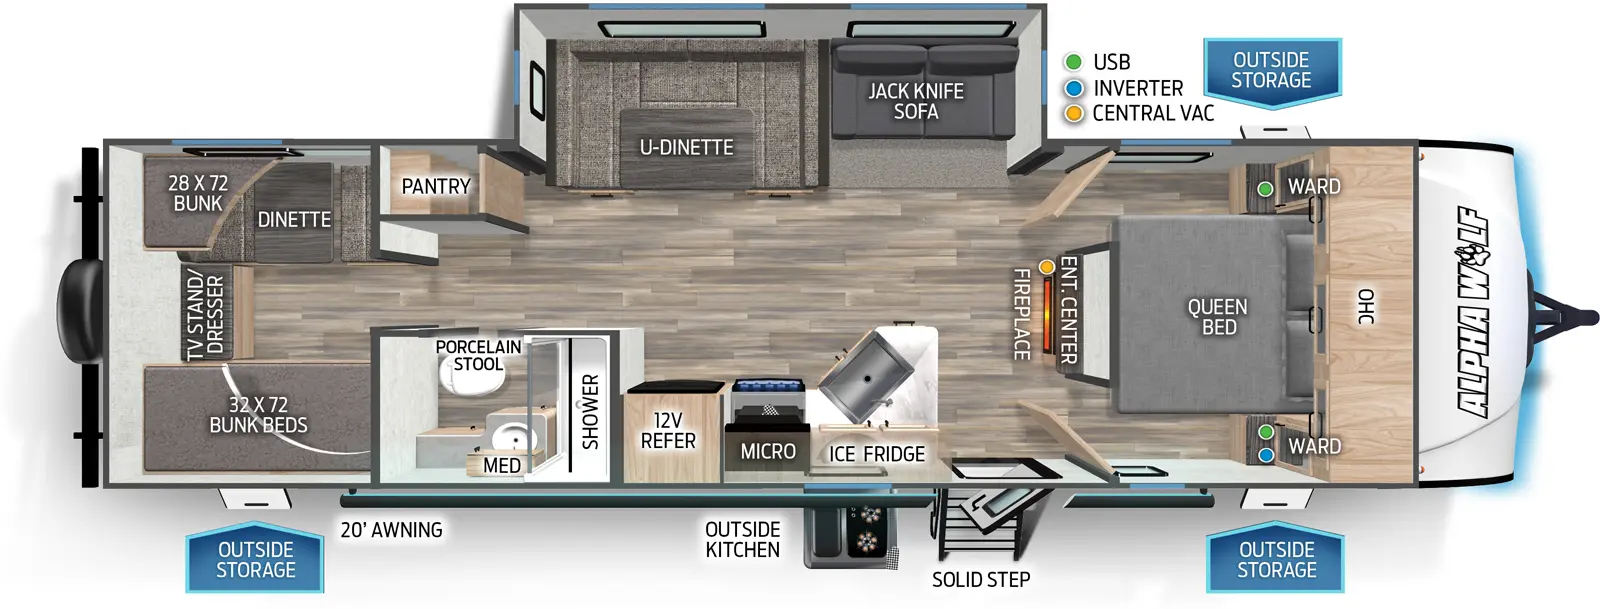 The 280QBS has one slideout and one entry. Exterior features front storage, solid step, outside kitchen, and 20 foot awning. Interior layout front to back: foot-facing queen bed with overhead cabinet and wardrobes on each side; island entertainment center with fireplace below; off-door side slideout with jackknife sofa and u-dinette; door side entry, peninsula kitchen counter with sink wraps to door side with microwave, cooktop, overhead cabinet and 12V refrigerator; off-door side pantry; door side full bathroom with porcelain toilet and medicine cabinet; rear bunk room with door side bunk beds, off-door side bunk above dinette, and rear TV stand/dresser.